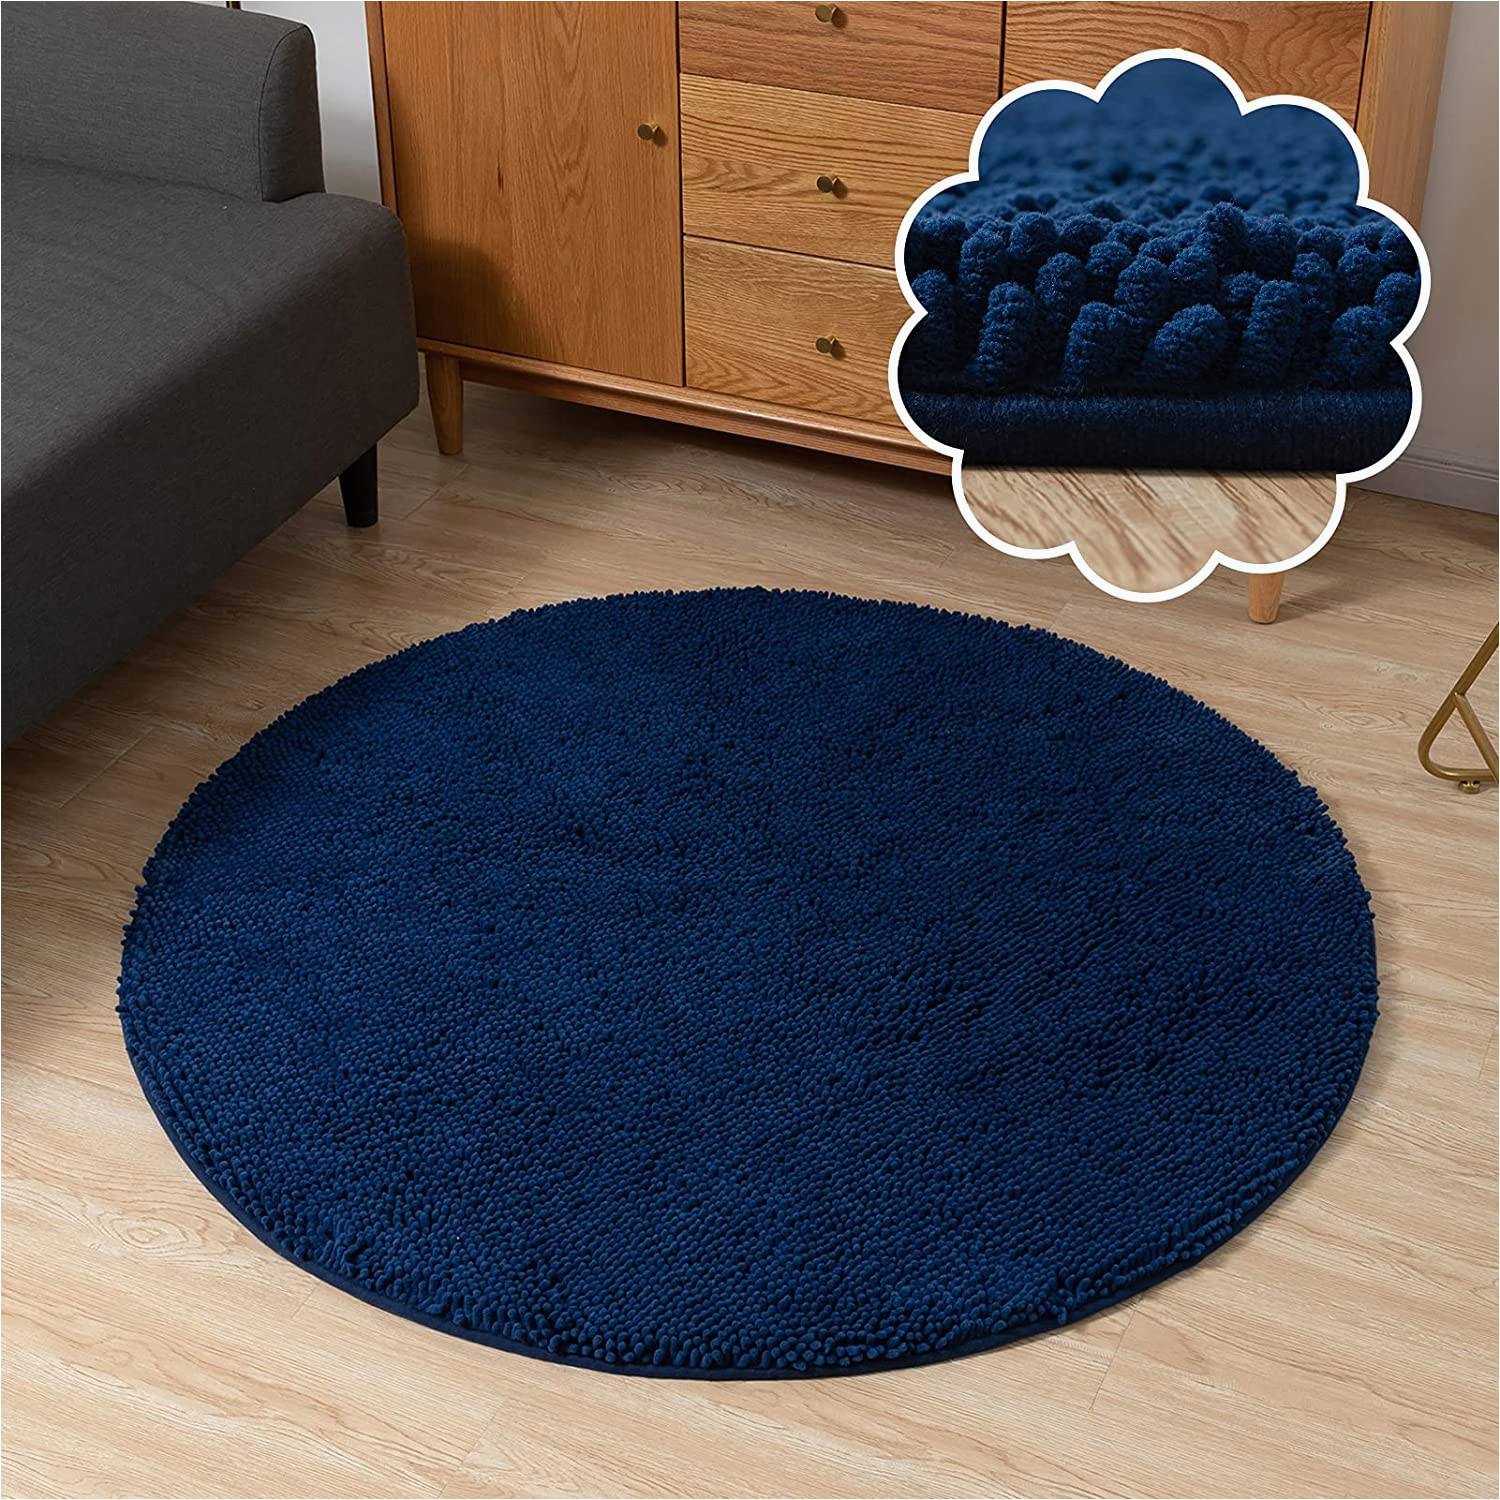 Navy Blue Round area Rug Buy Antjumper 3ft Navy Blue Round Rug, Circle Chenille Rug for …